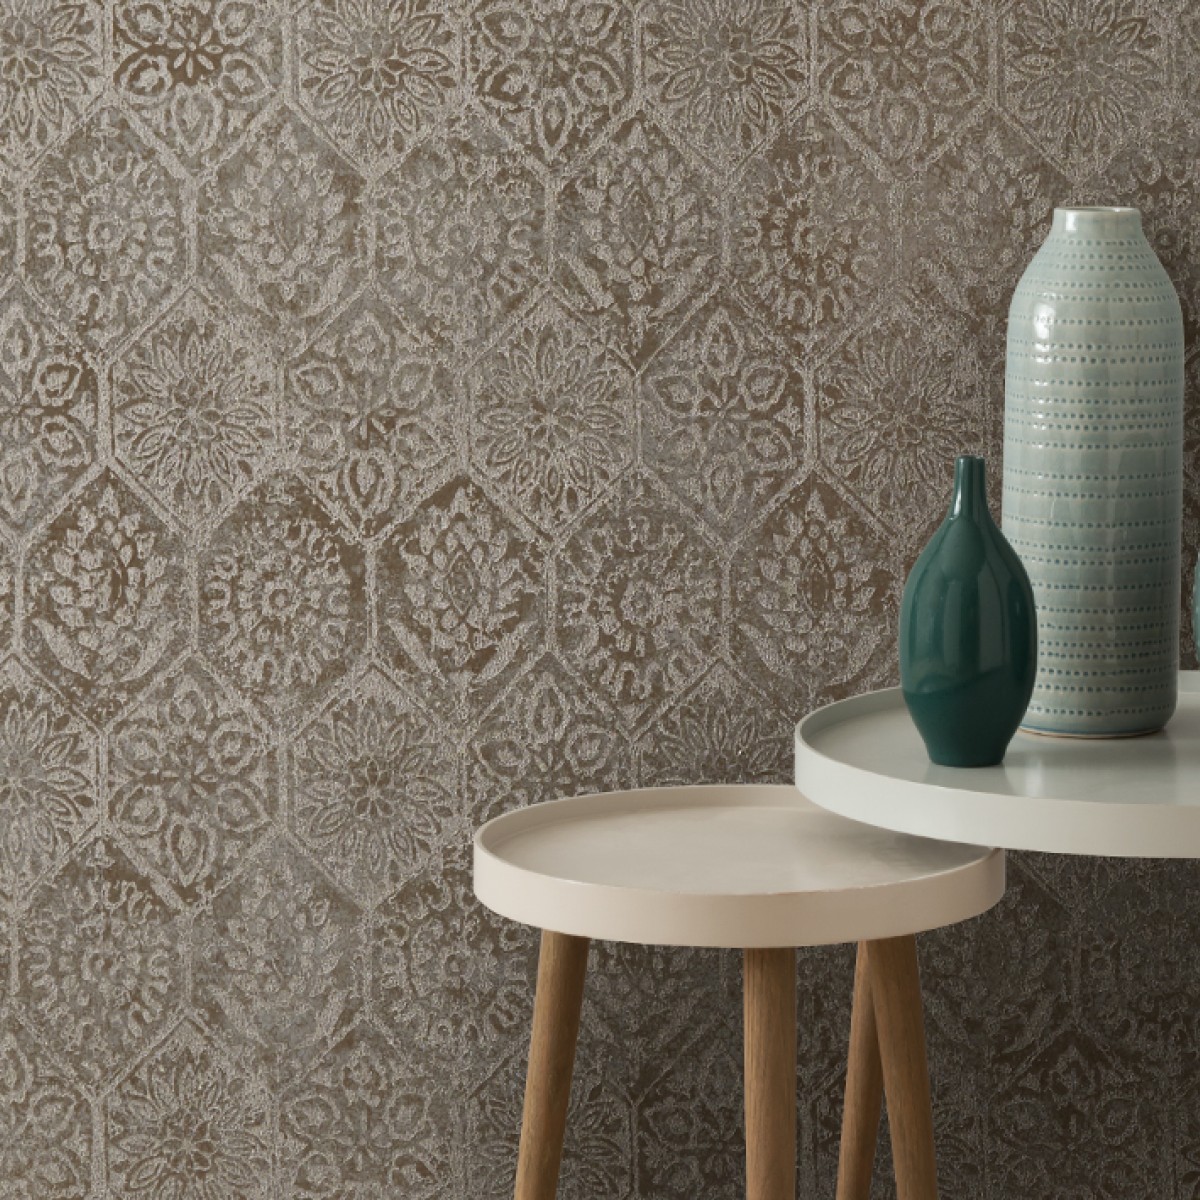 Tapet Palazzo, Burnished Gold Foil Luxury Tile, 1838 Wallcoverings, 5.3mp / rola, Tapet living 